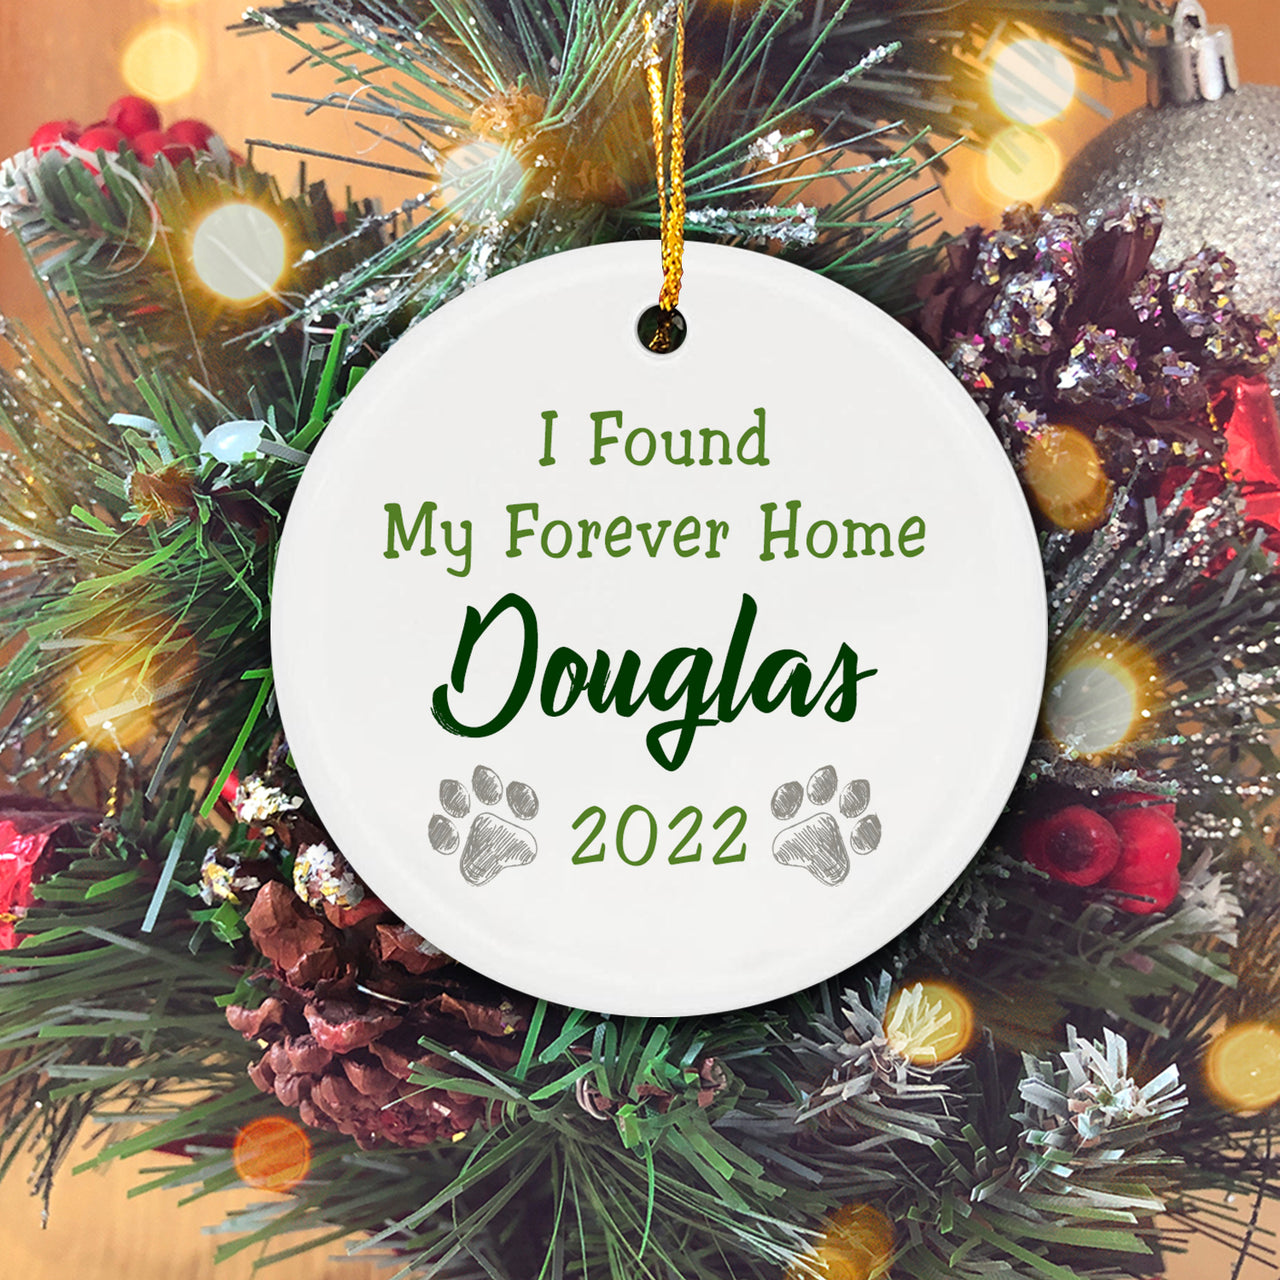 Pet Dog Adoption Gift Found My Forever Home Personalized Christmas Premium Ceramic Ornaments Sets